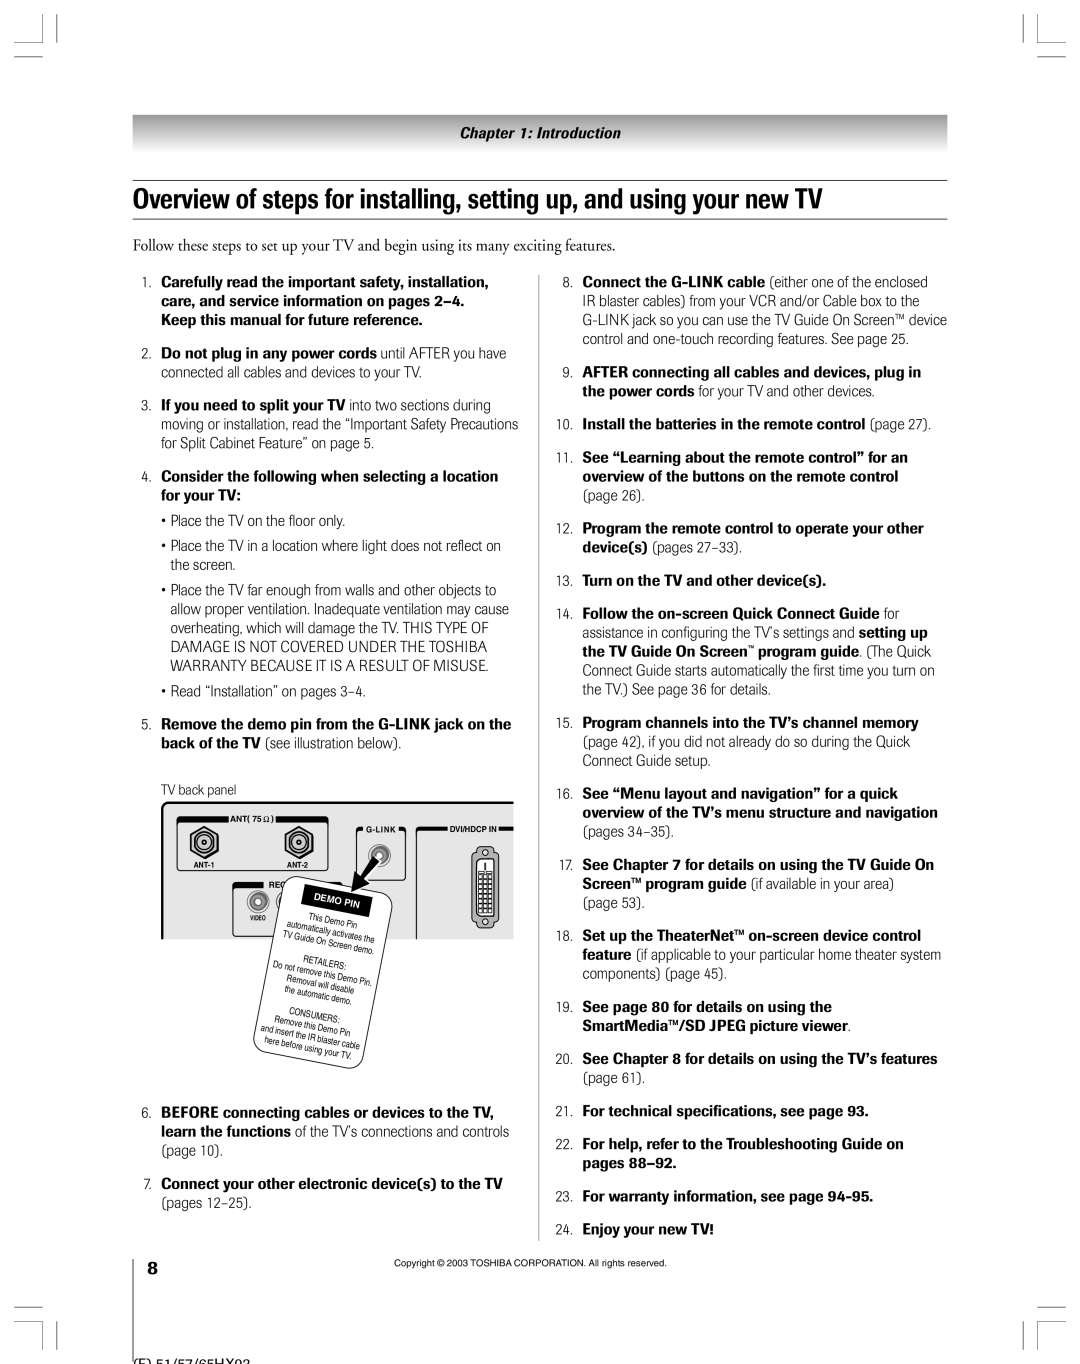 Toshiba 51HX93 owner manual Overview of steps for installing, setting up, and using your new TV, Introduction 